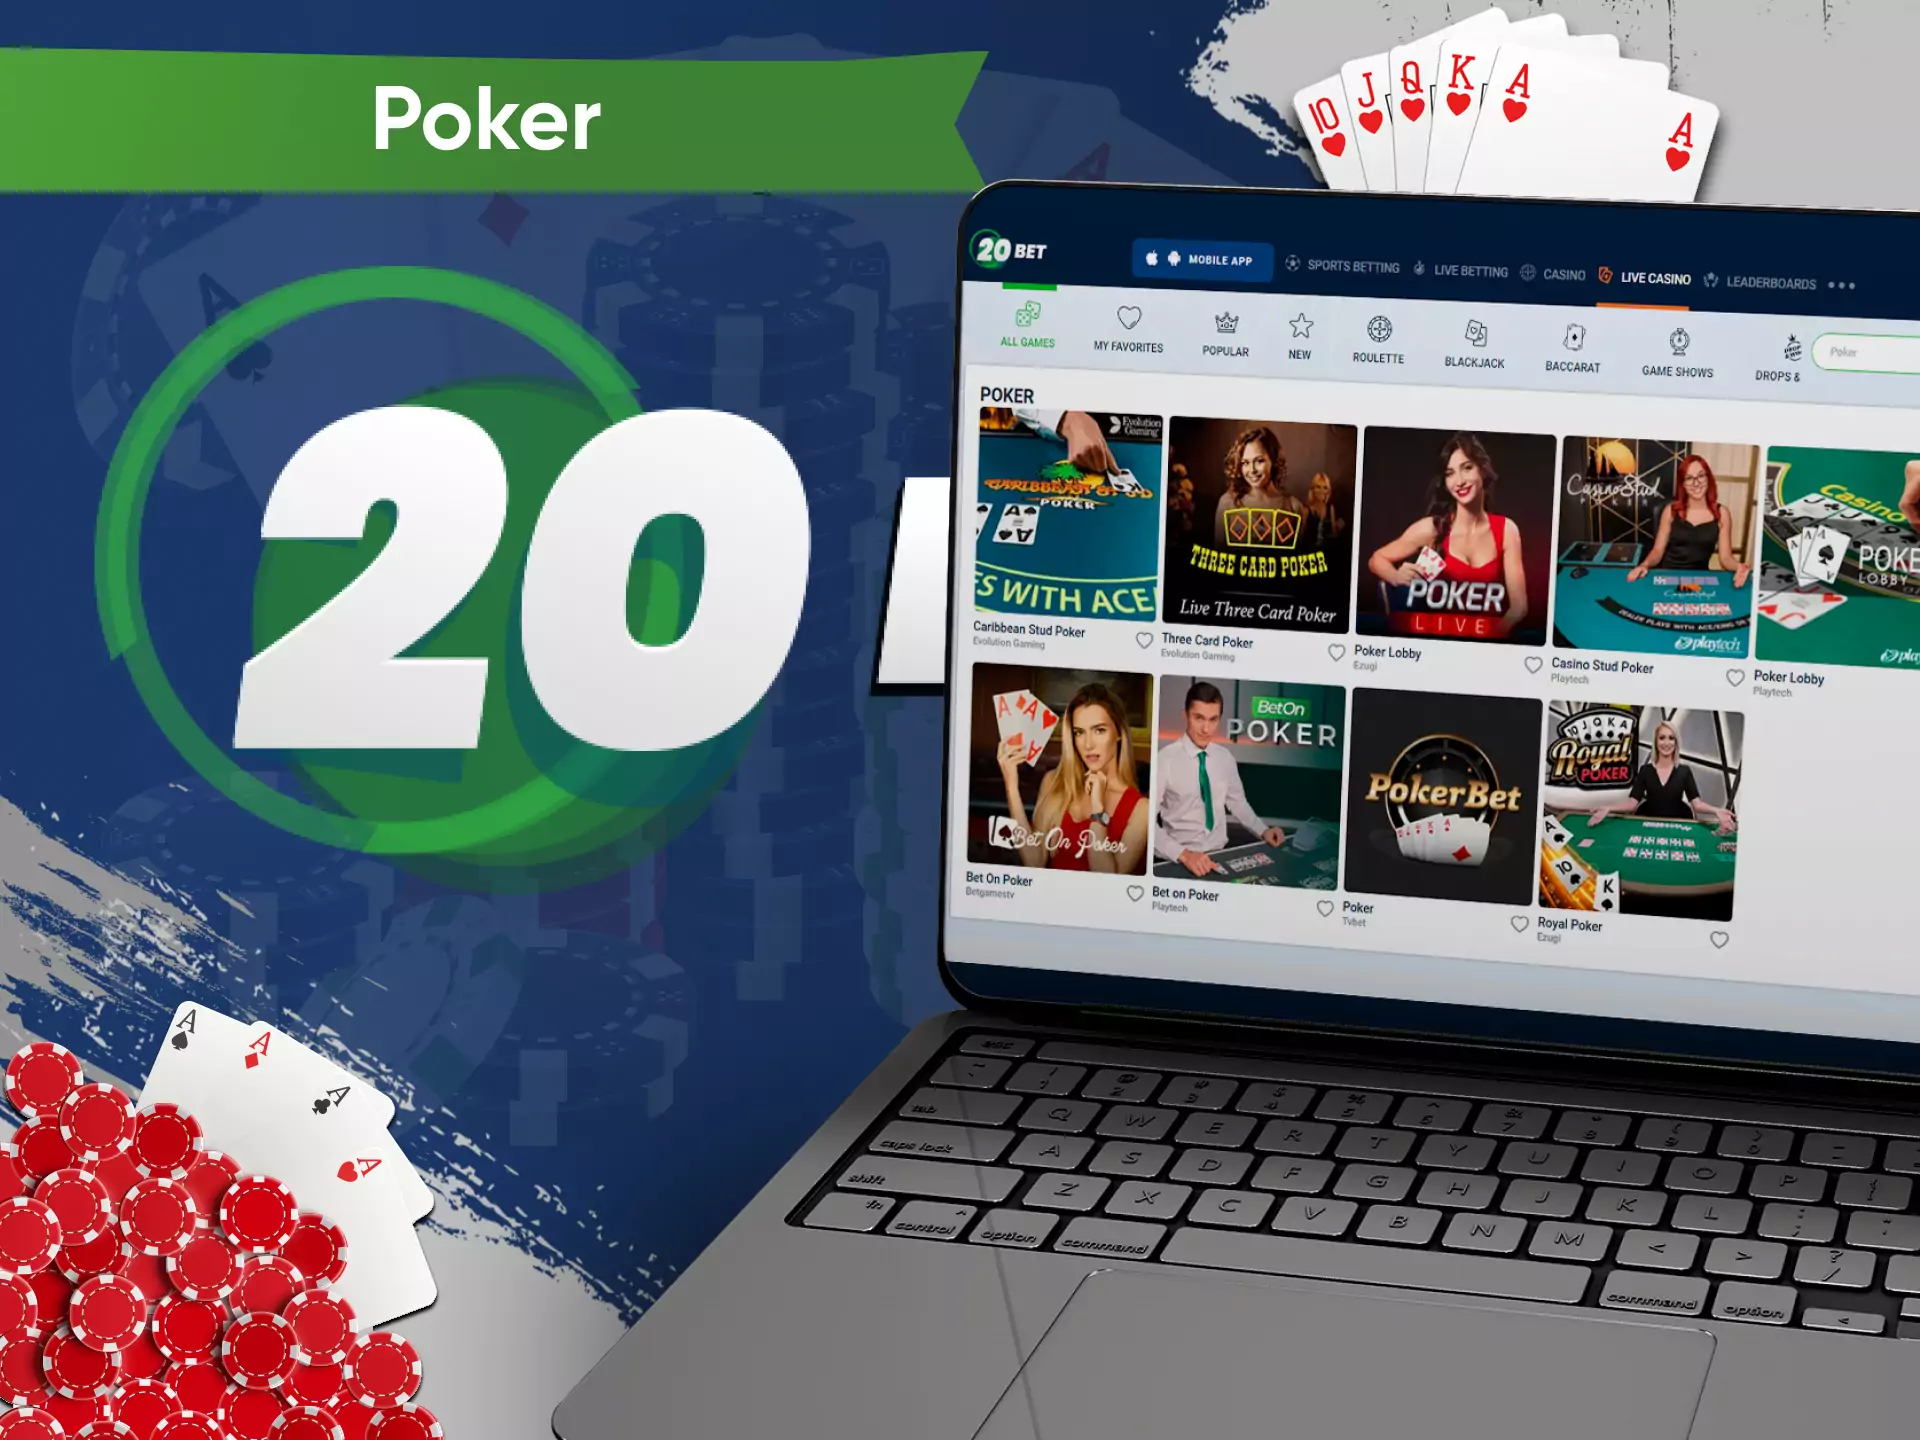 Go to the 20bet casino to play poker with live dealers.